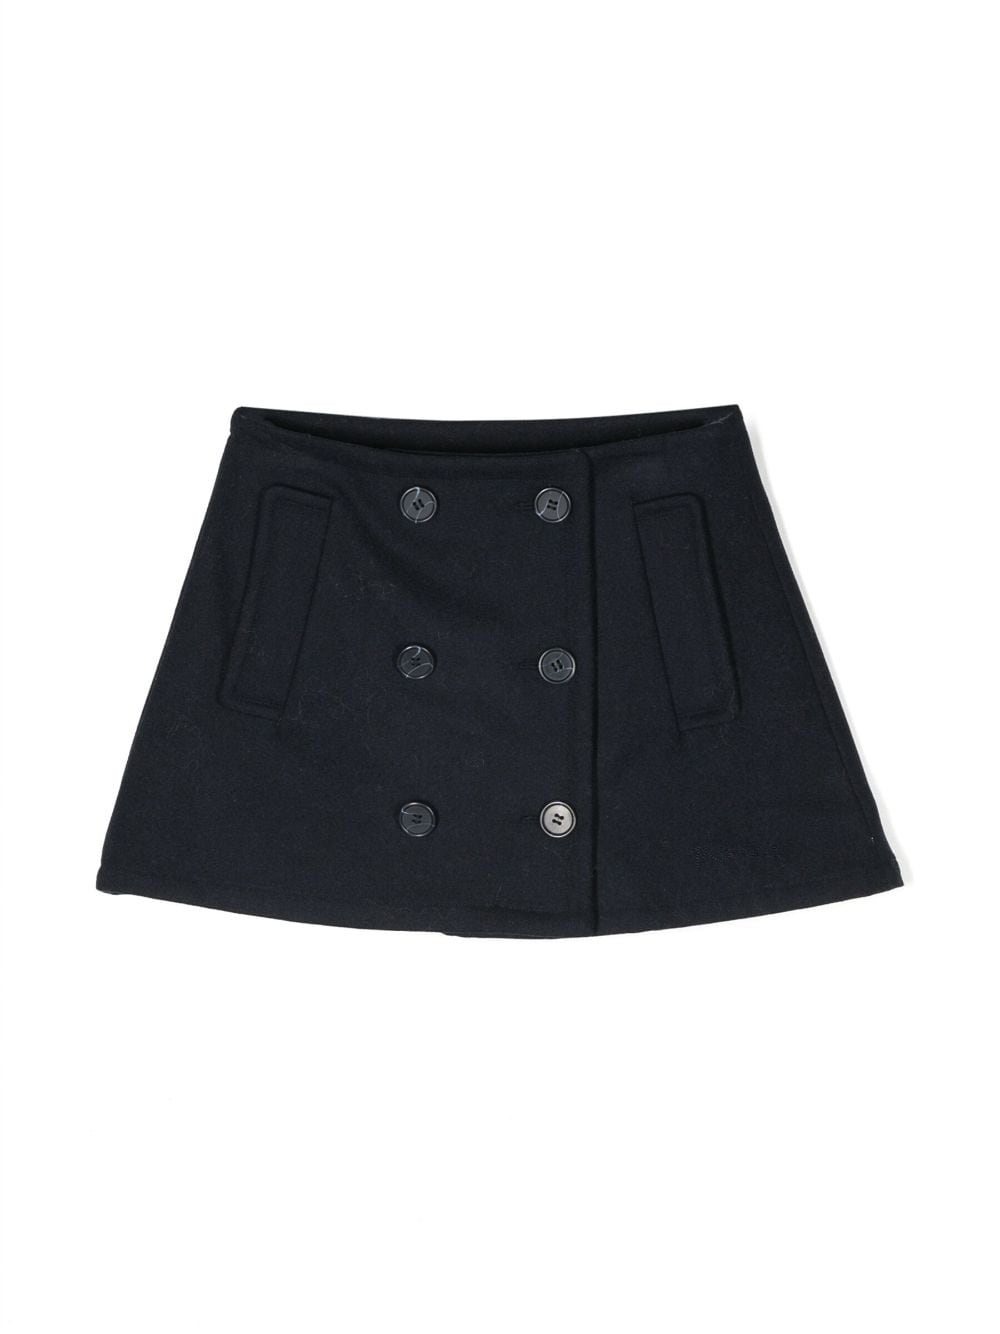 Image 1 of Marni Kids double-breasted skirt